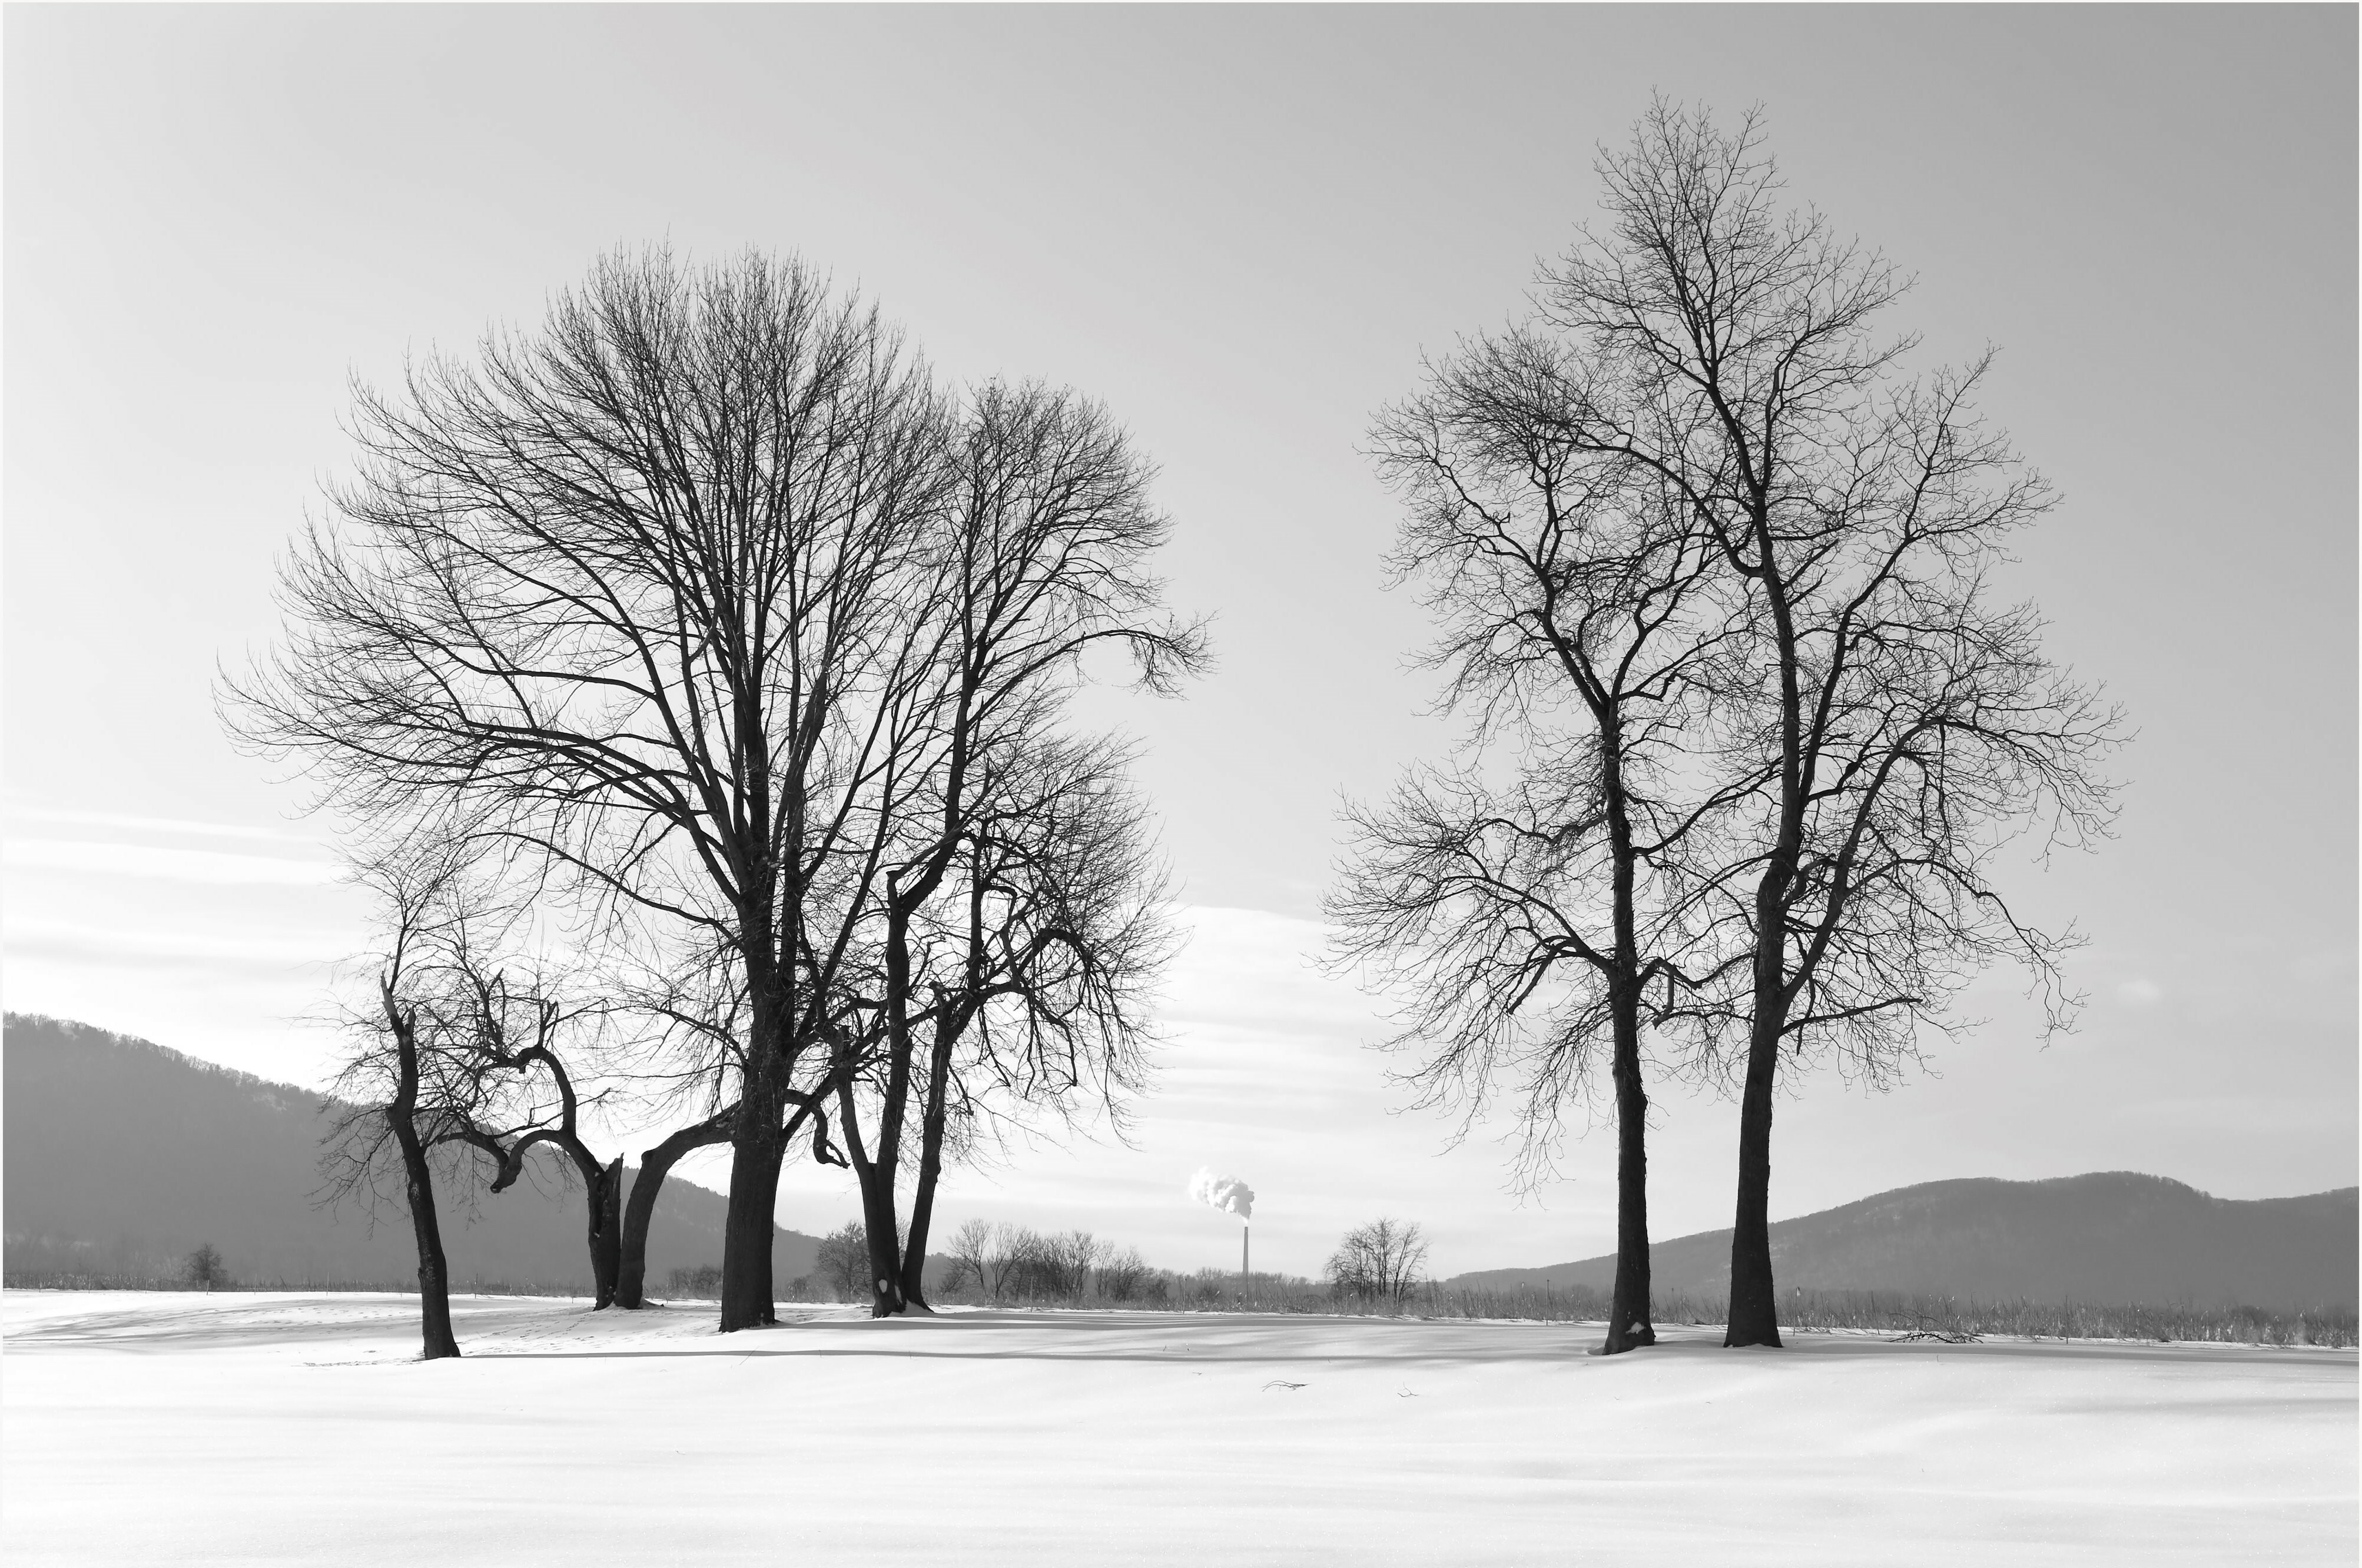 Stephen Petegorsky, "Winter Trees and Smokestack," 2009, Pigment inkjet print, 17 × 22 in. (43.2 × 55.9 cm), Gift of the artist, 2019.3.12